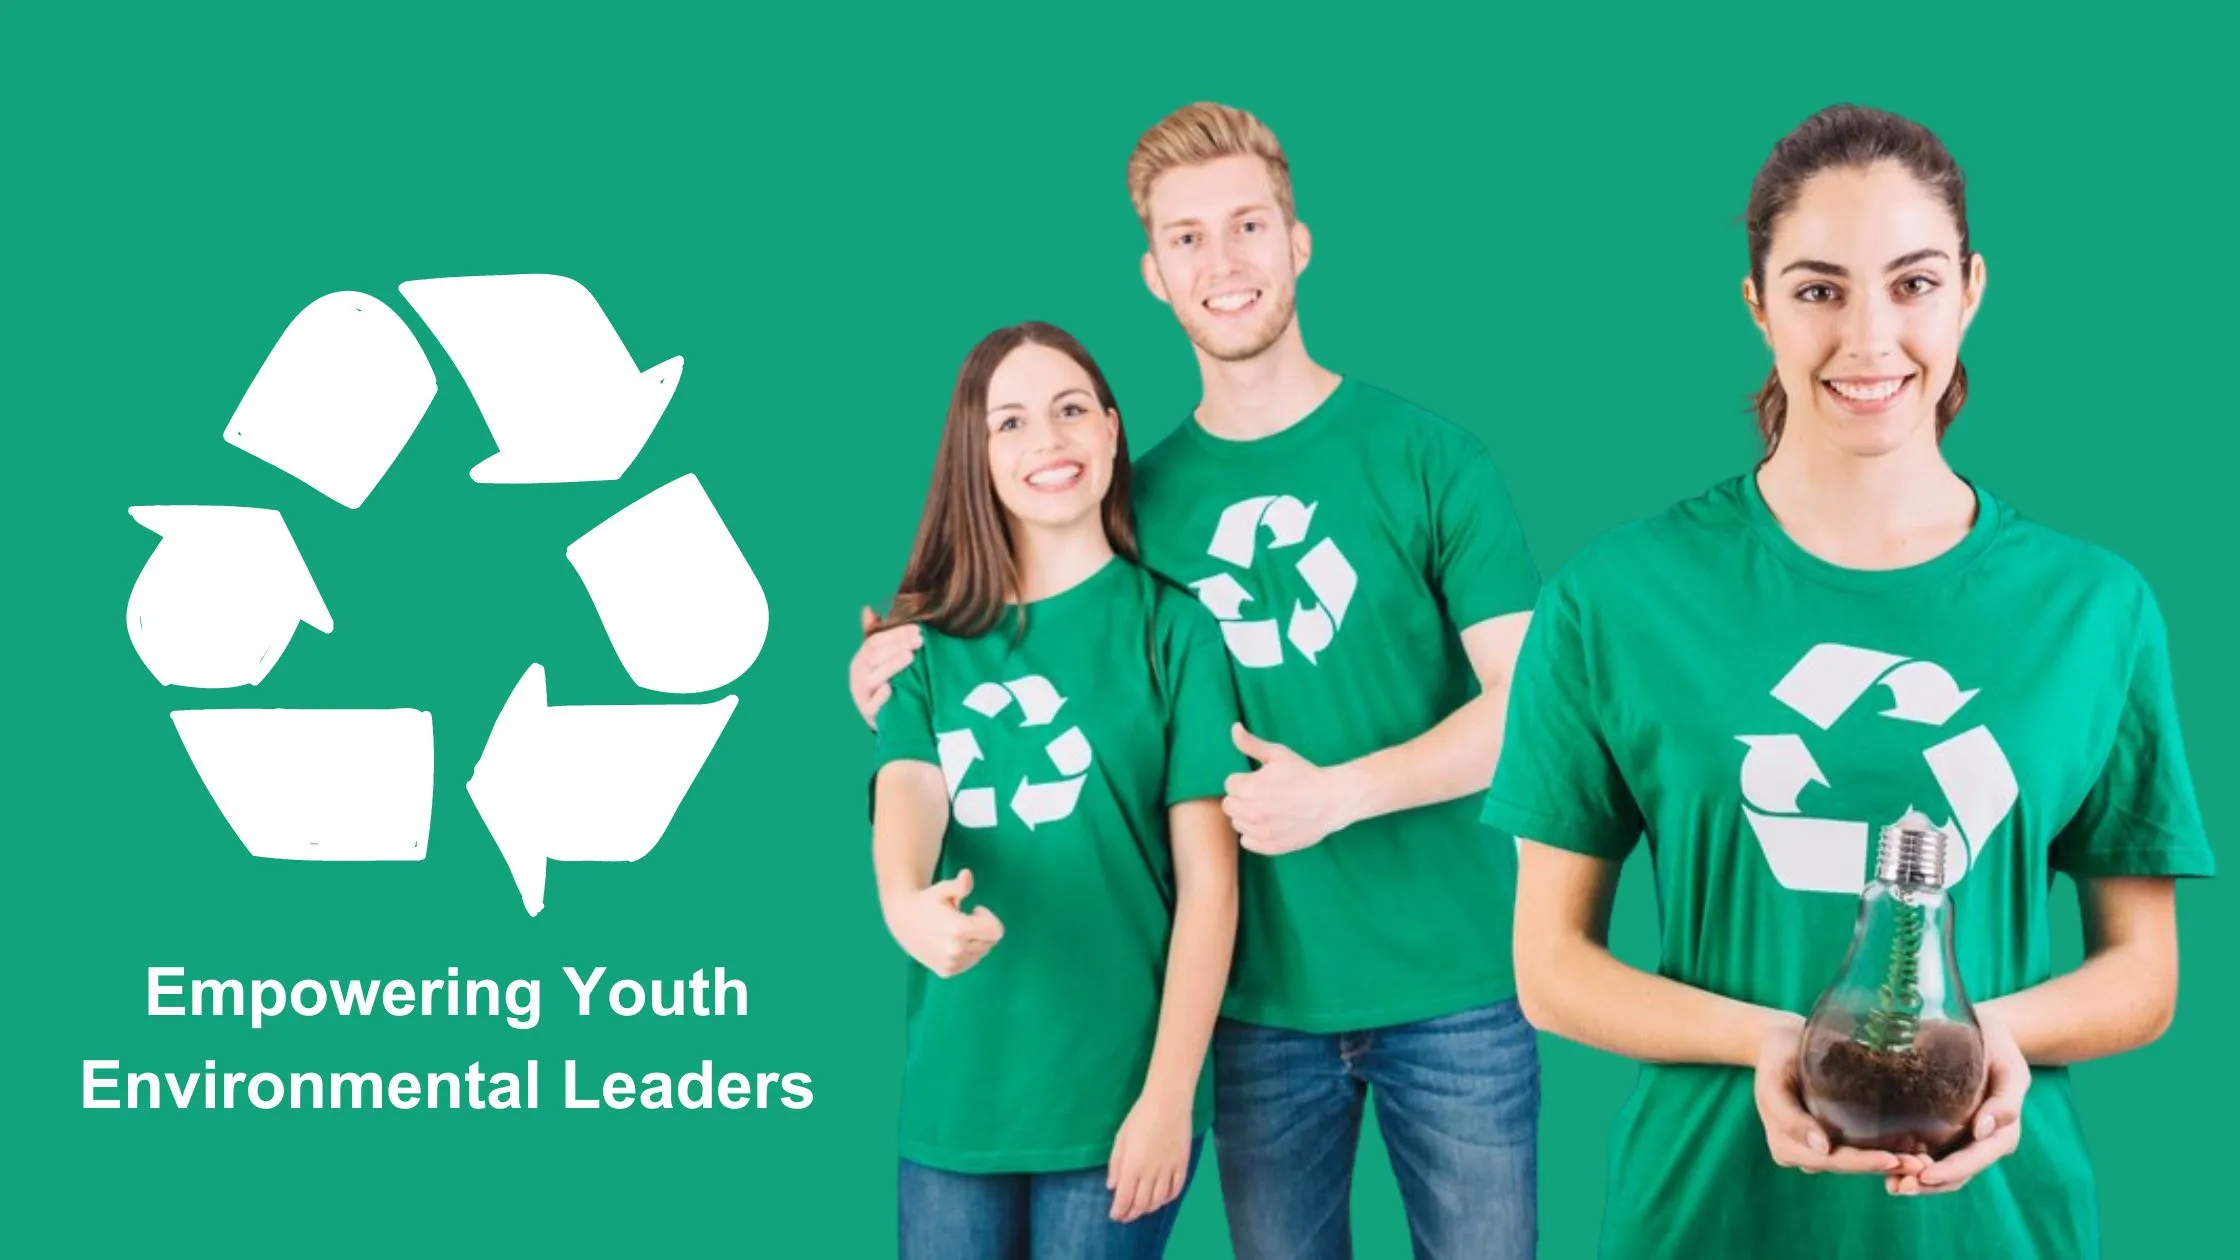 Empowering Youth Environmental Leaders: Initiatives Making a Difference